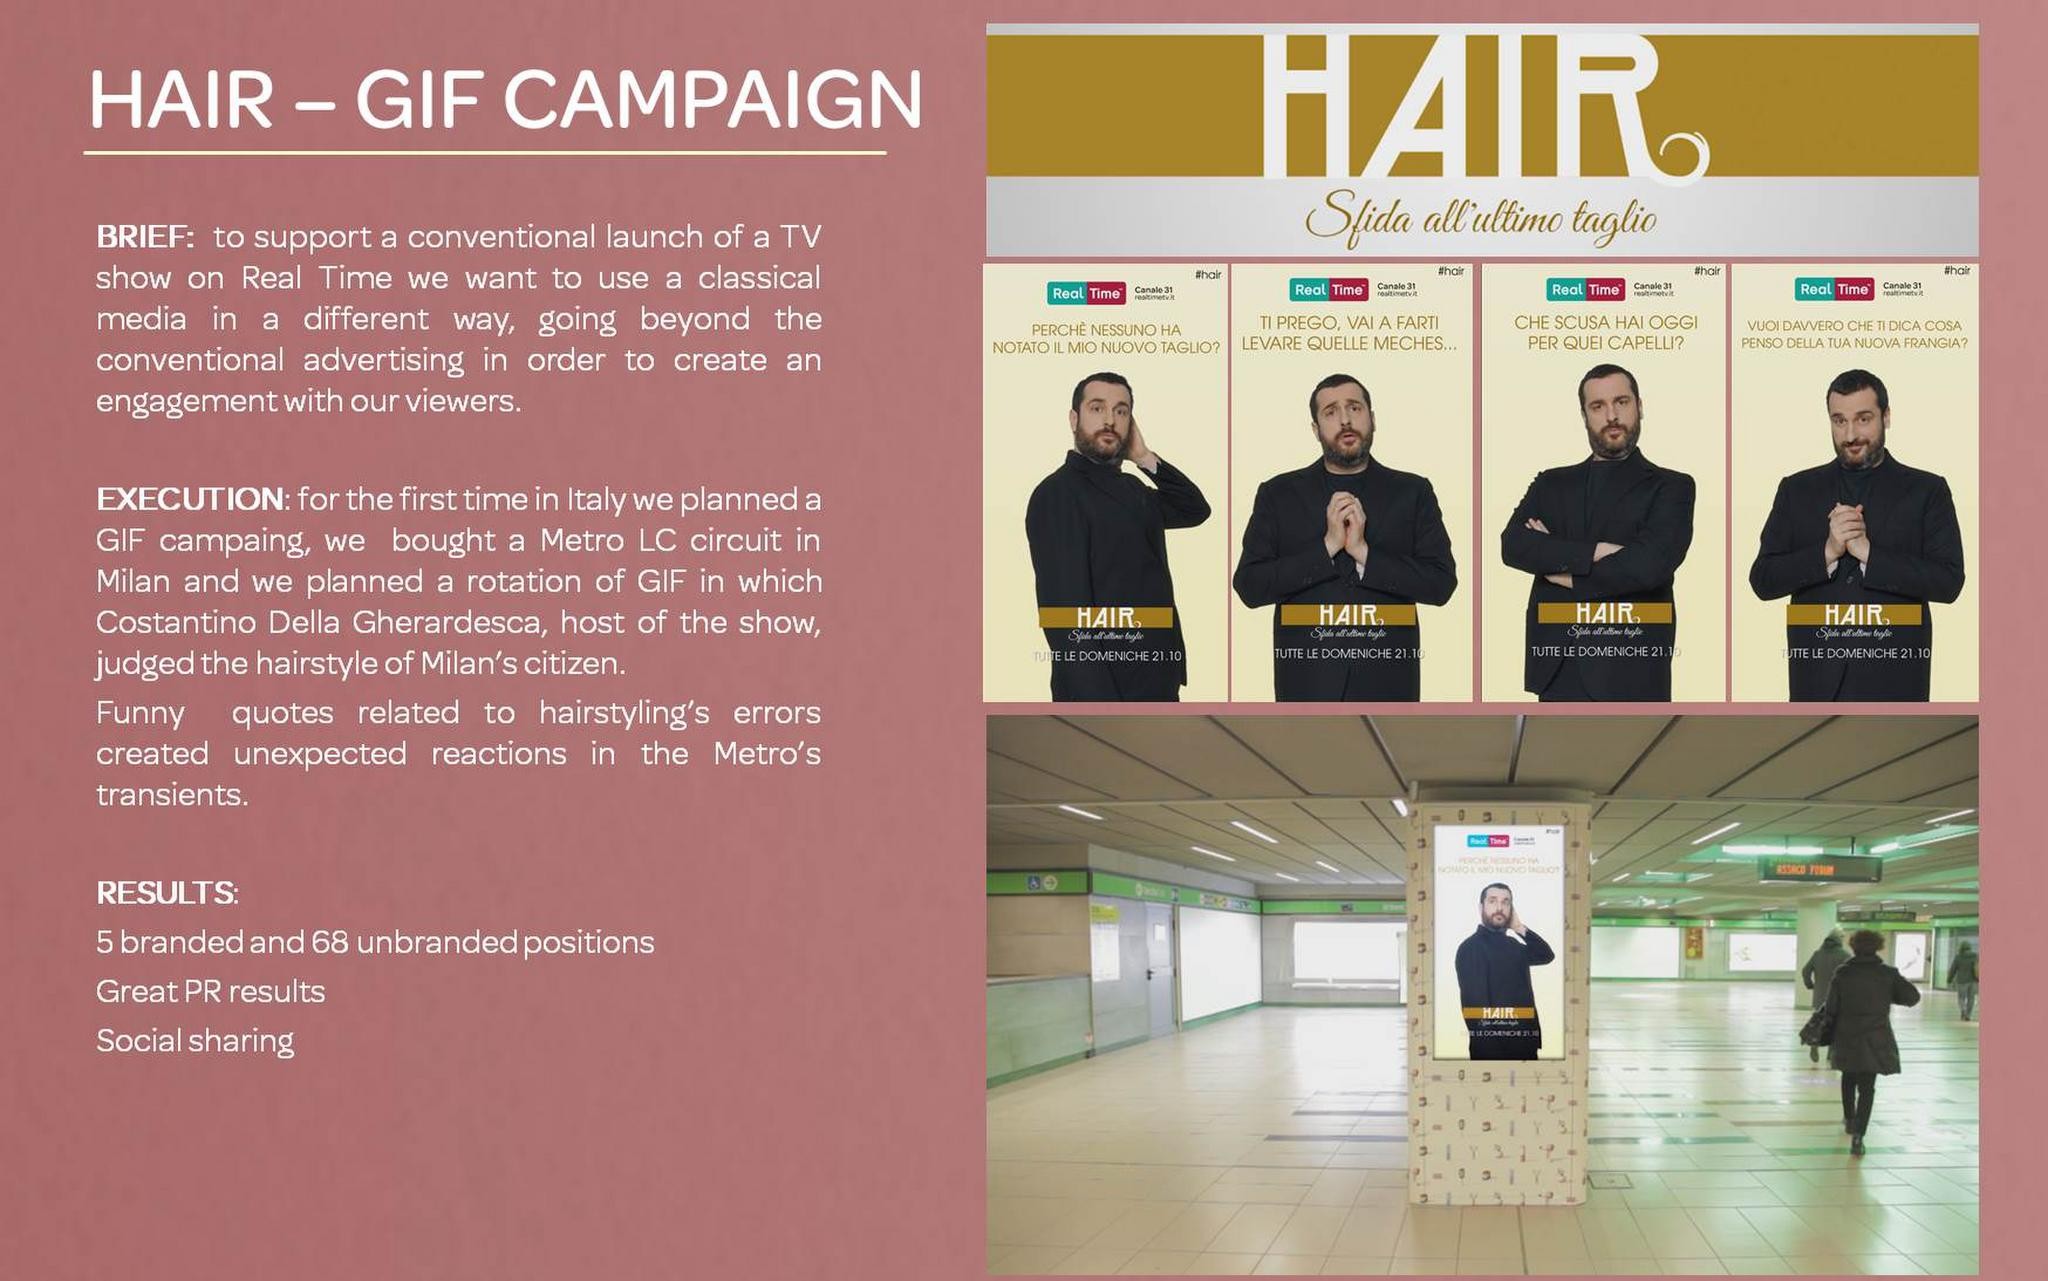 HAIR - OUTDOOR GIF CAMPAIGN